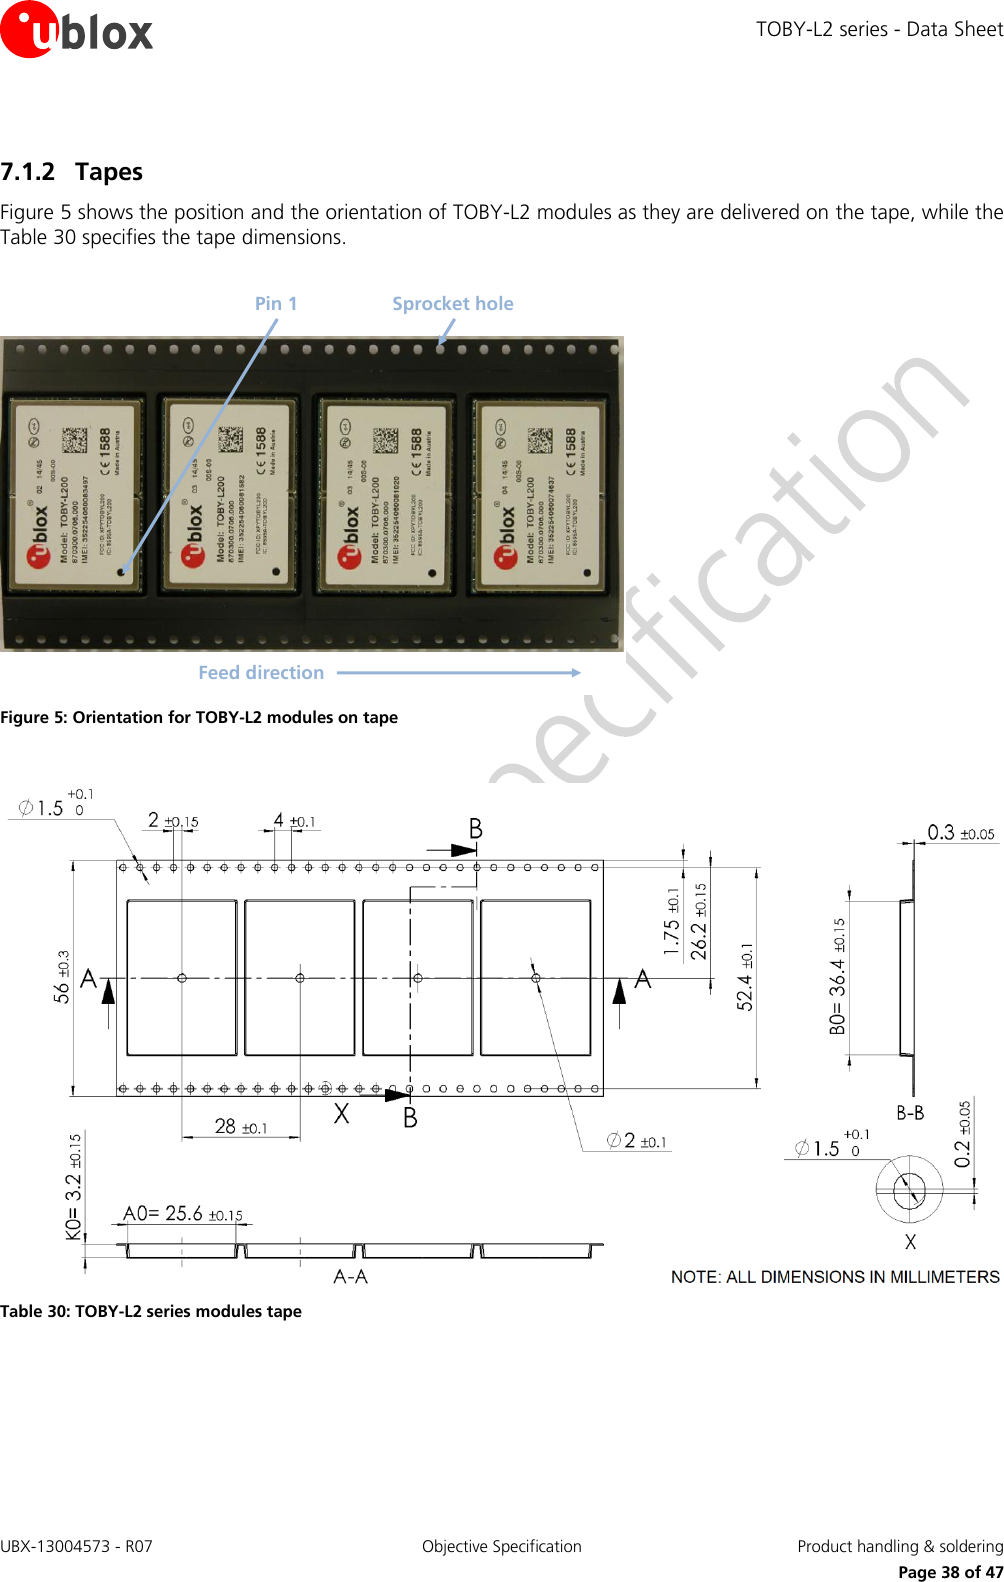 TOBY-L2 series - Data Sheet UBX-13004573 - R07  Objective Specification  Product handling &amp; soldering   Page 38 of 47 7.1.2 Tapes Figure 5 shows the position and the orientation of TOBY-L2 modules as they are delivered on the tape, while the Table 30 specifies the tape dimensions.  Feed directionPin 1 Sprocket hole Figure 5: Orientation for TOBY-L2 modules on tape   Table 30: TOBY-L2 series modules tape  